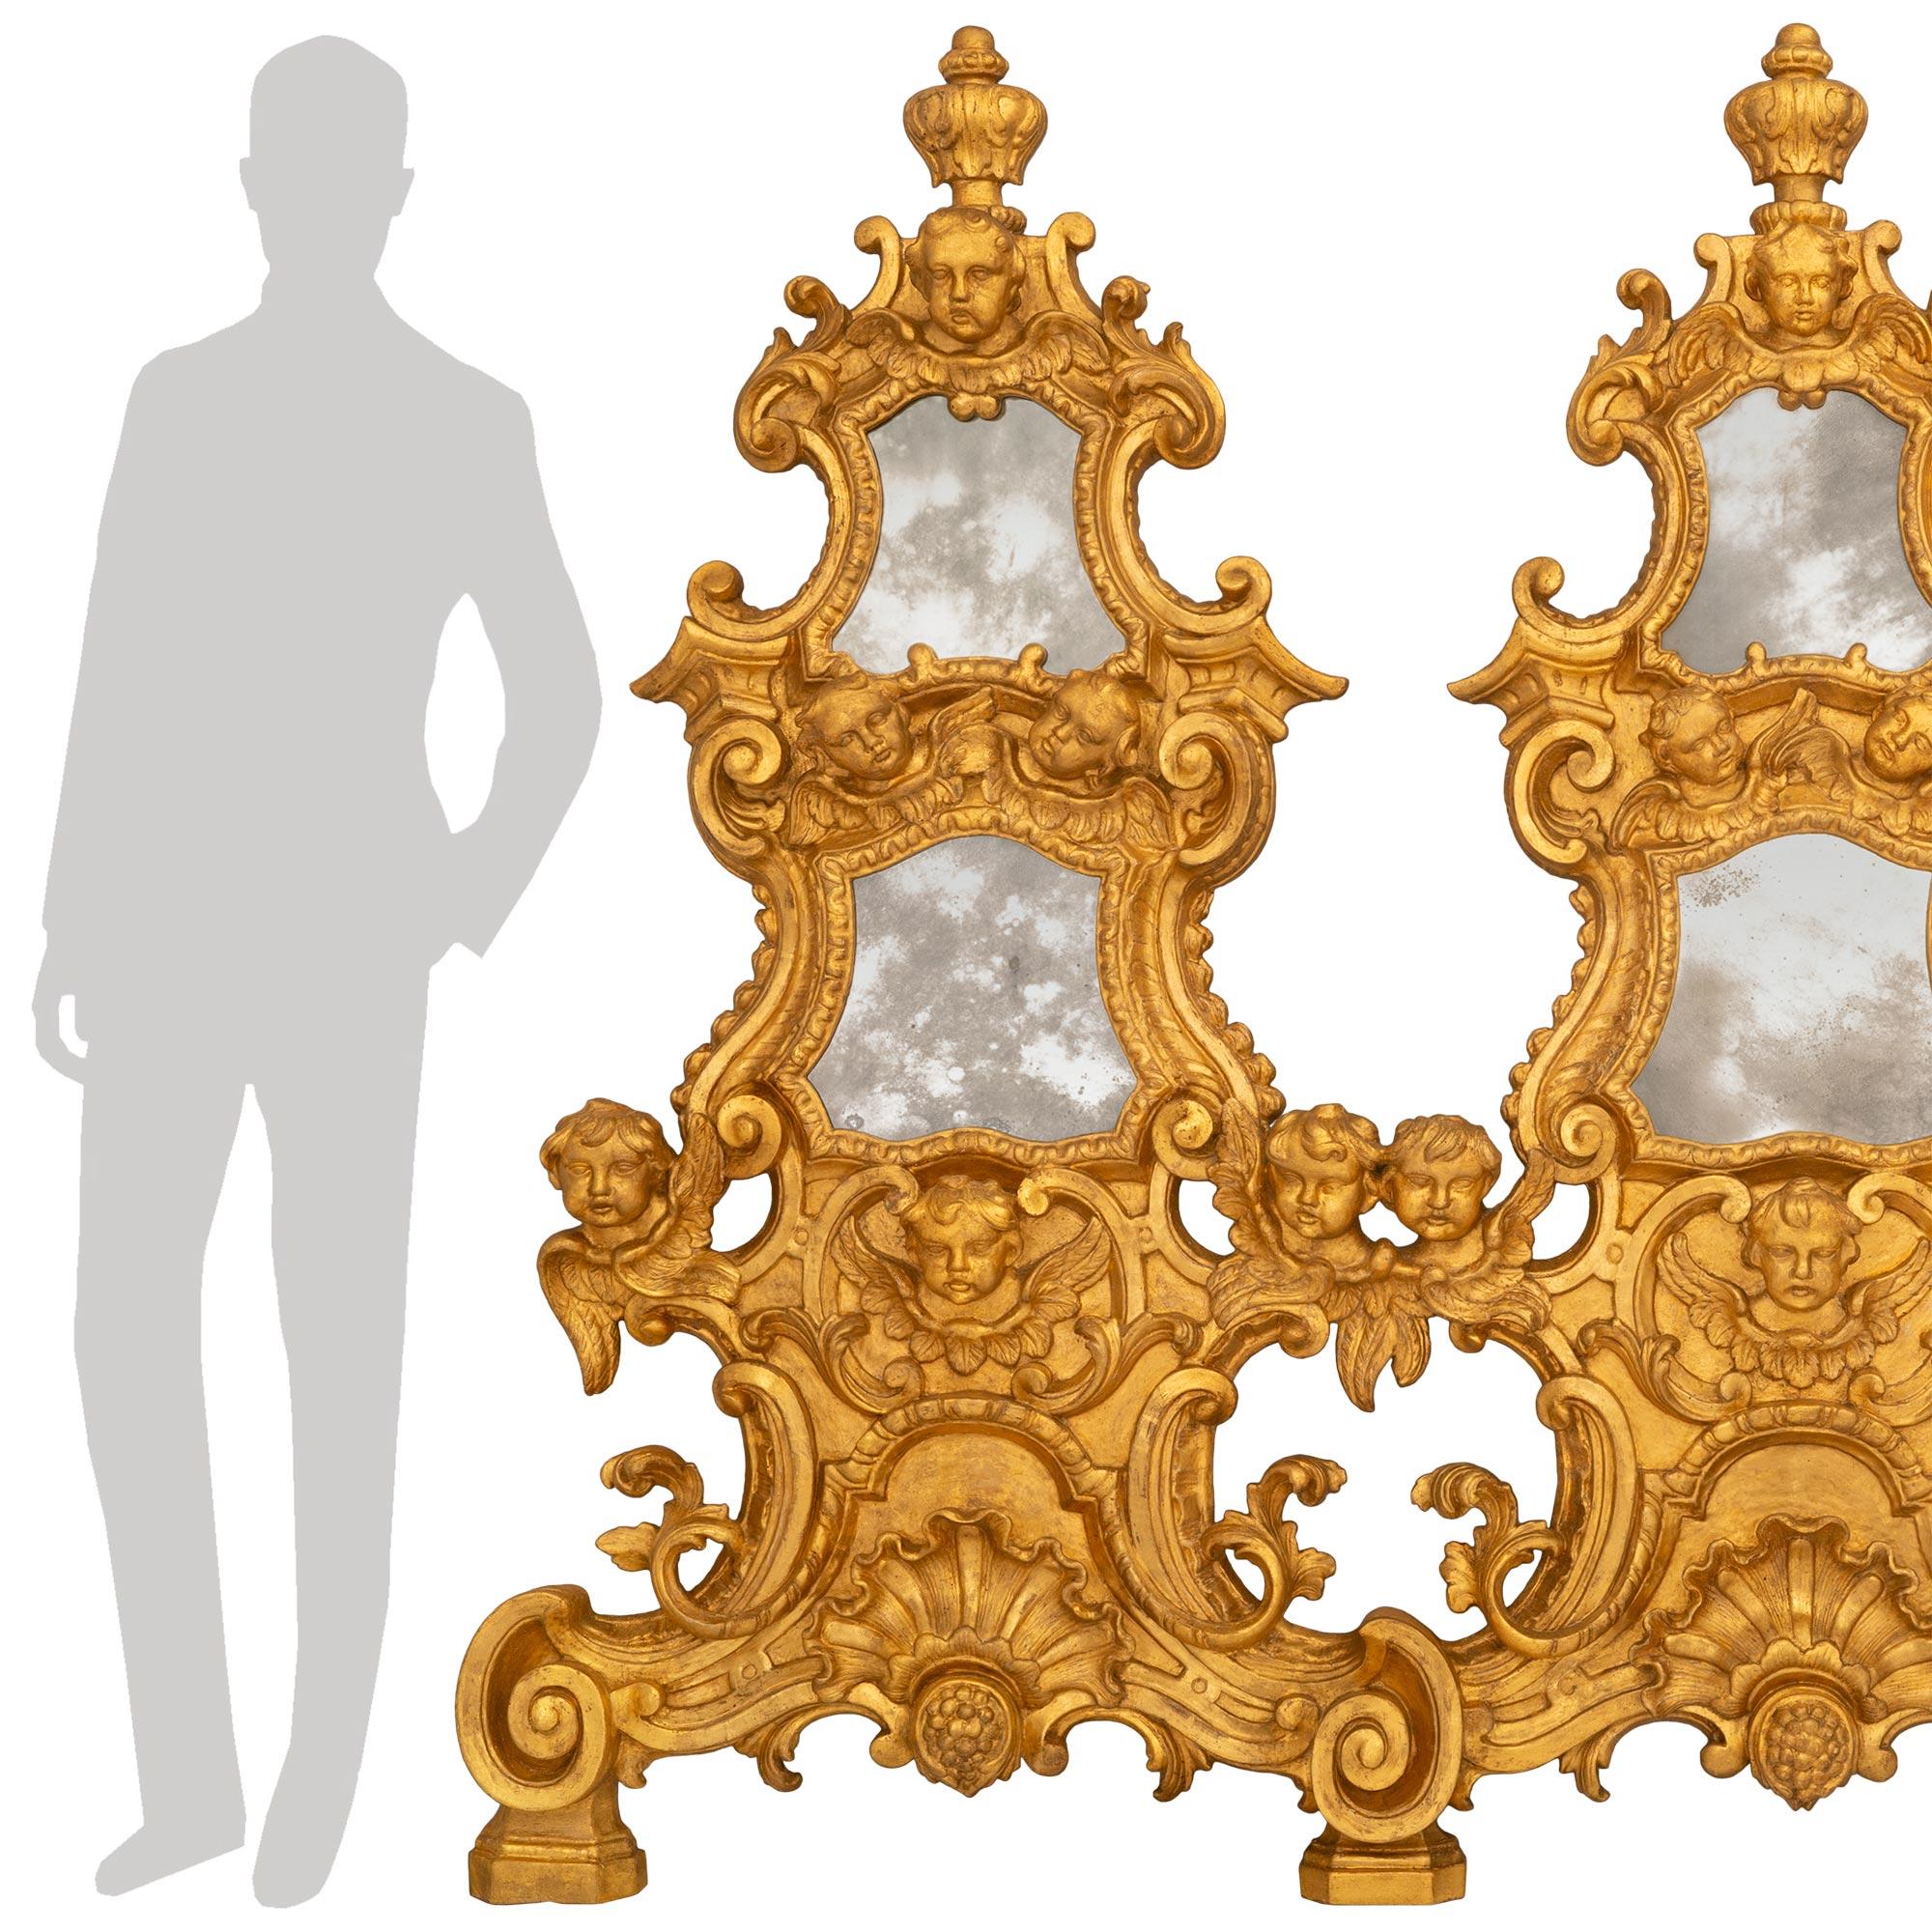 A most unique and impressive Italian early 18th century Baroque st. giltwood triple mirror/wall decor. The remarkable and extremely decorative mirror/wall decor is raised by four mottled block supports below scrolled designs flanking central shell